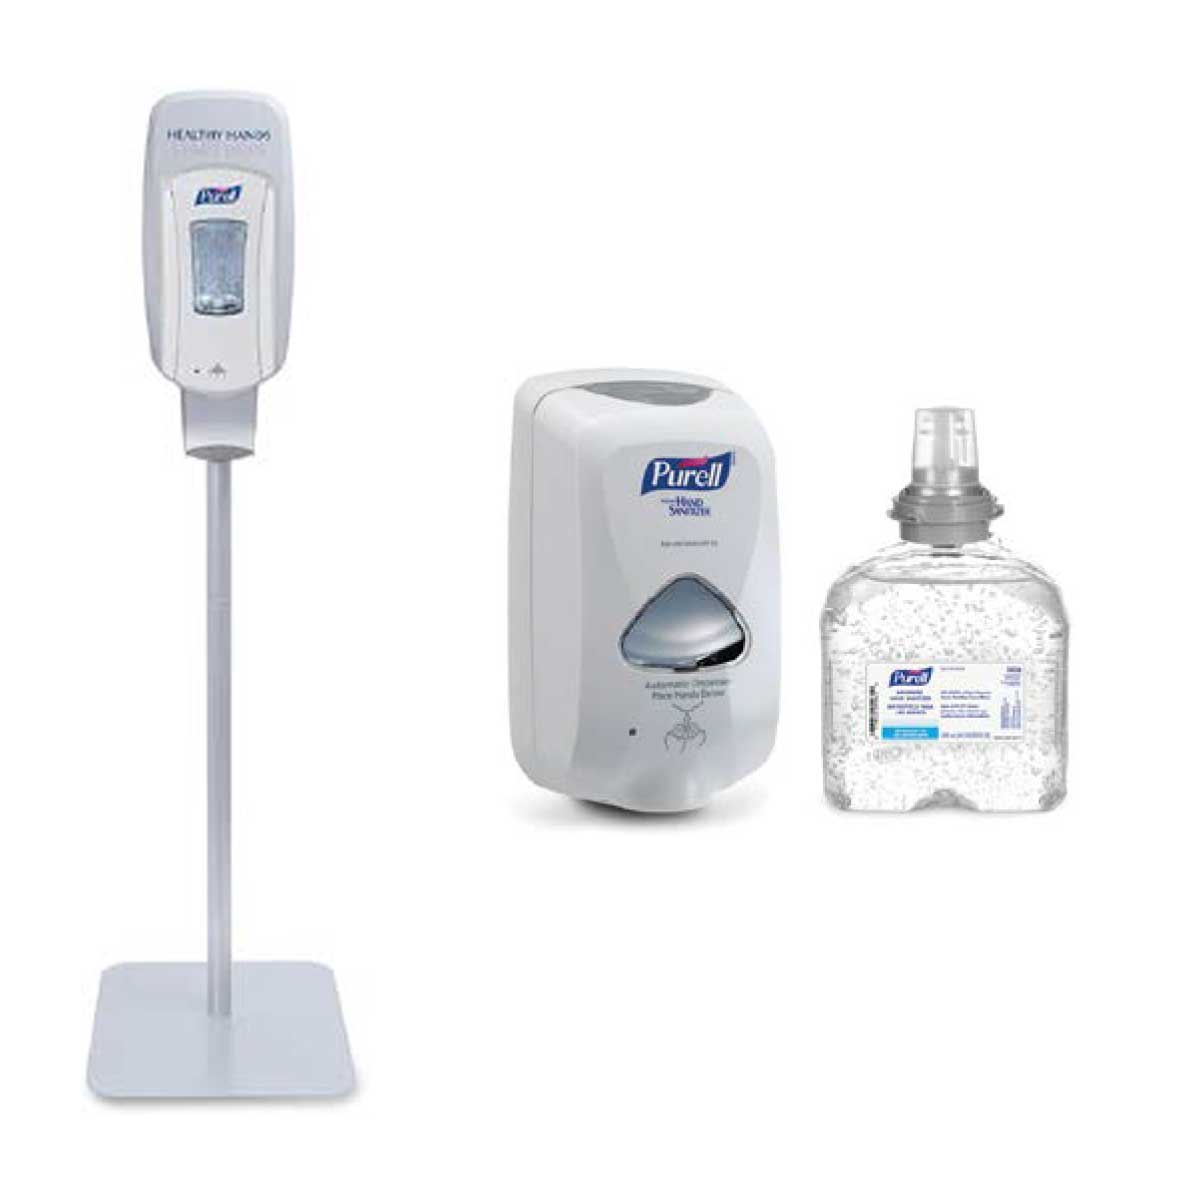 Hand sanitizer dispenser for employee use at disinfecting and sanitizing in your office